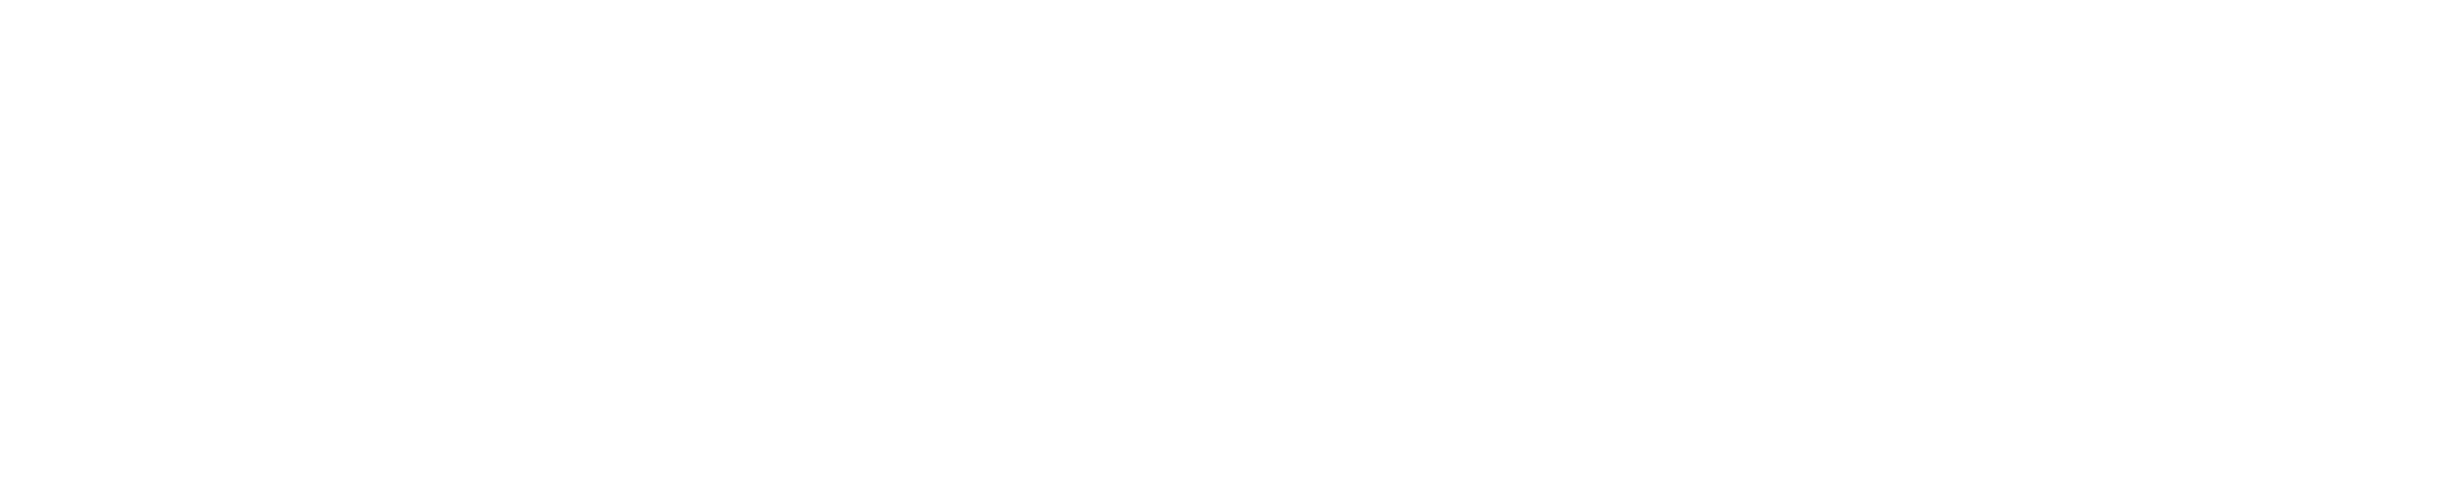 Sony logo PNG Image